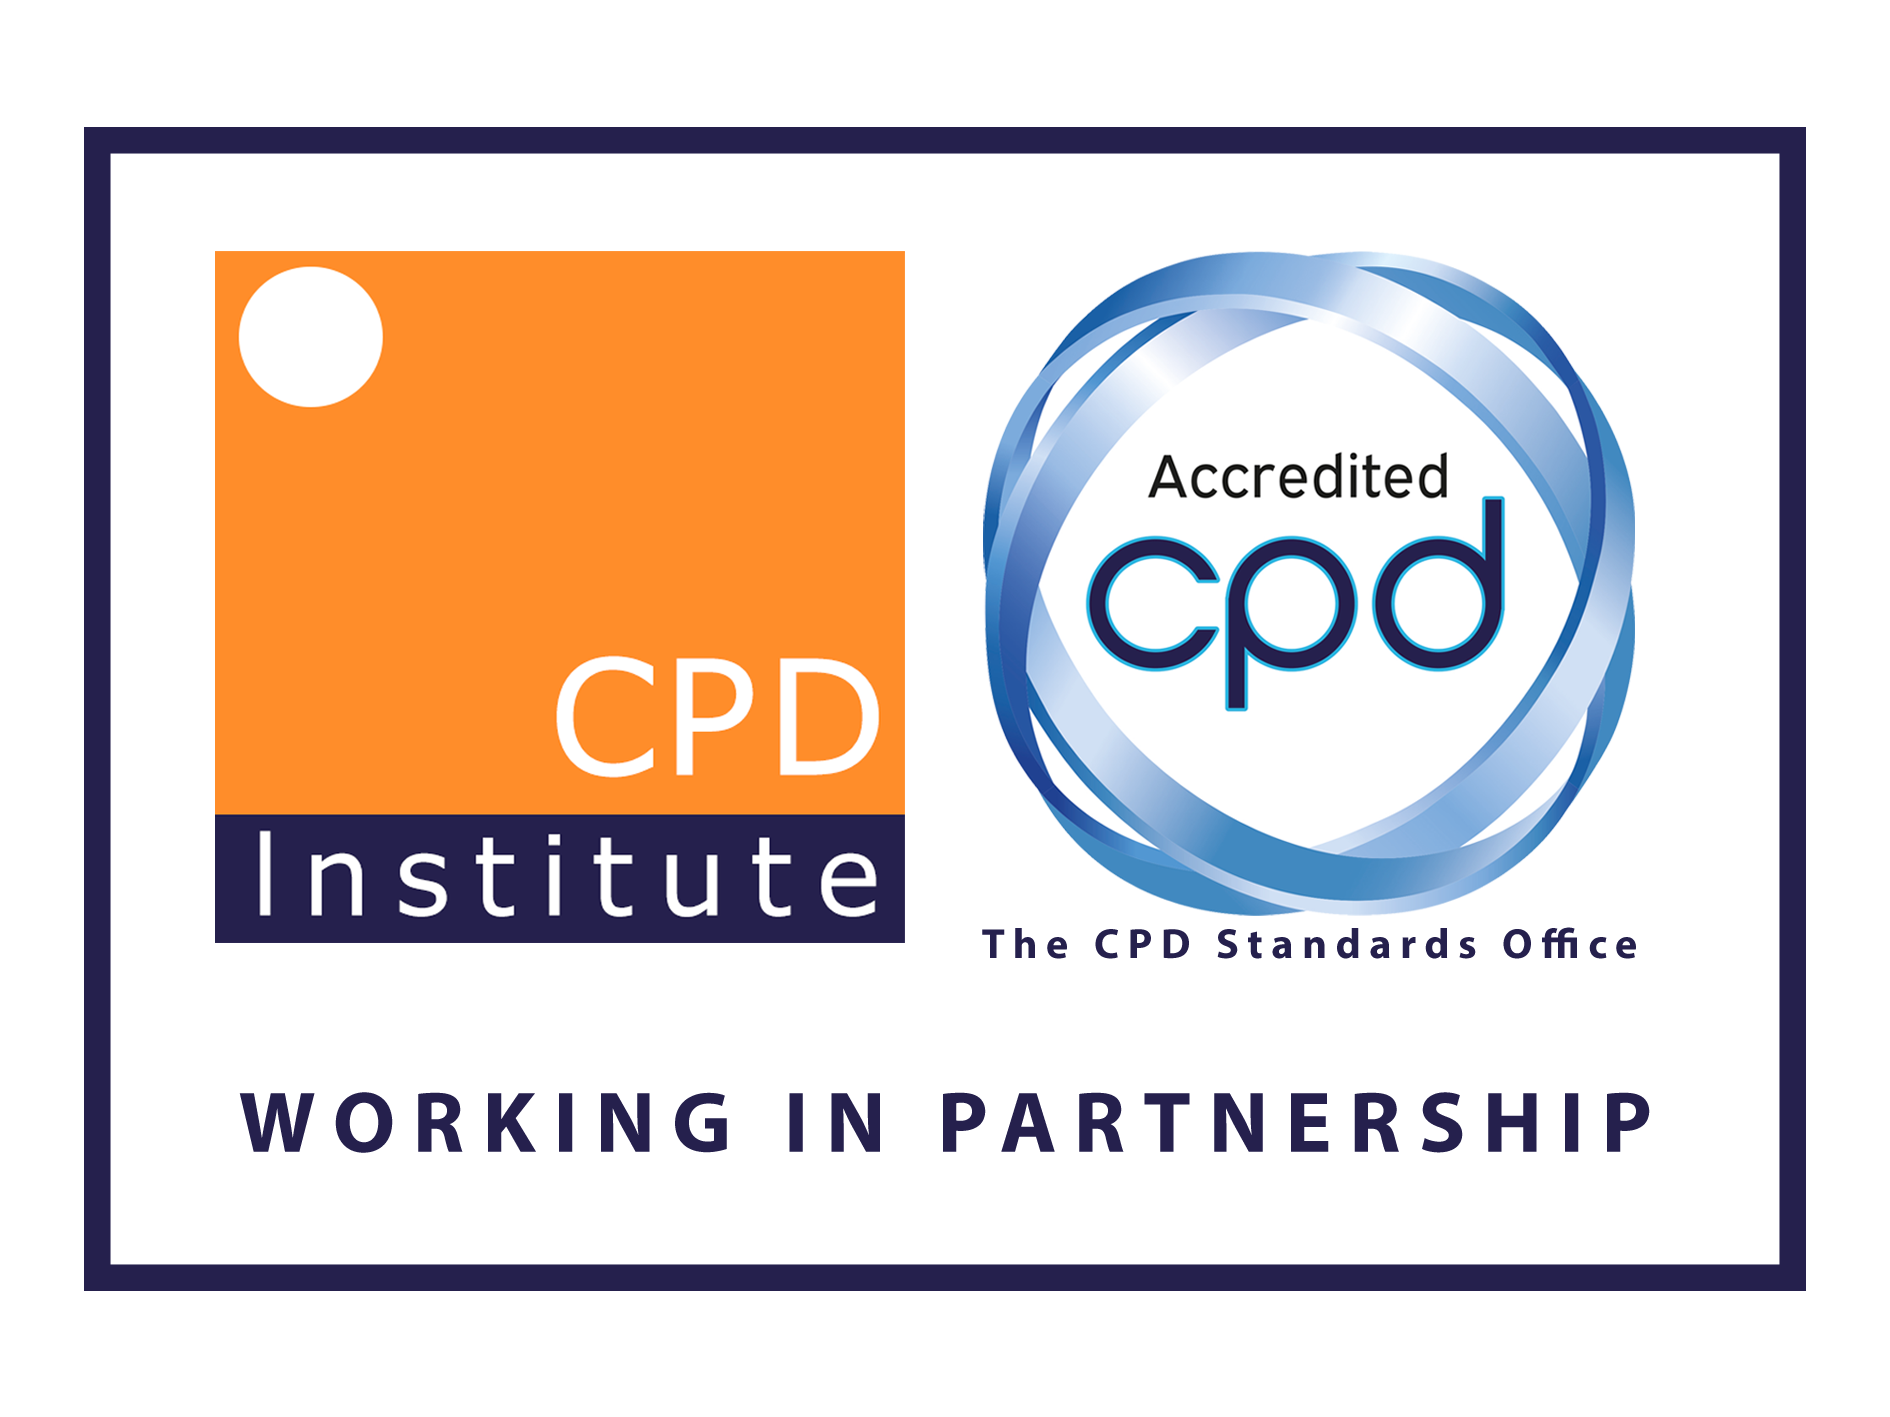 CPDSO and iCPD Partnership Logo